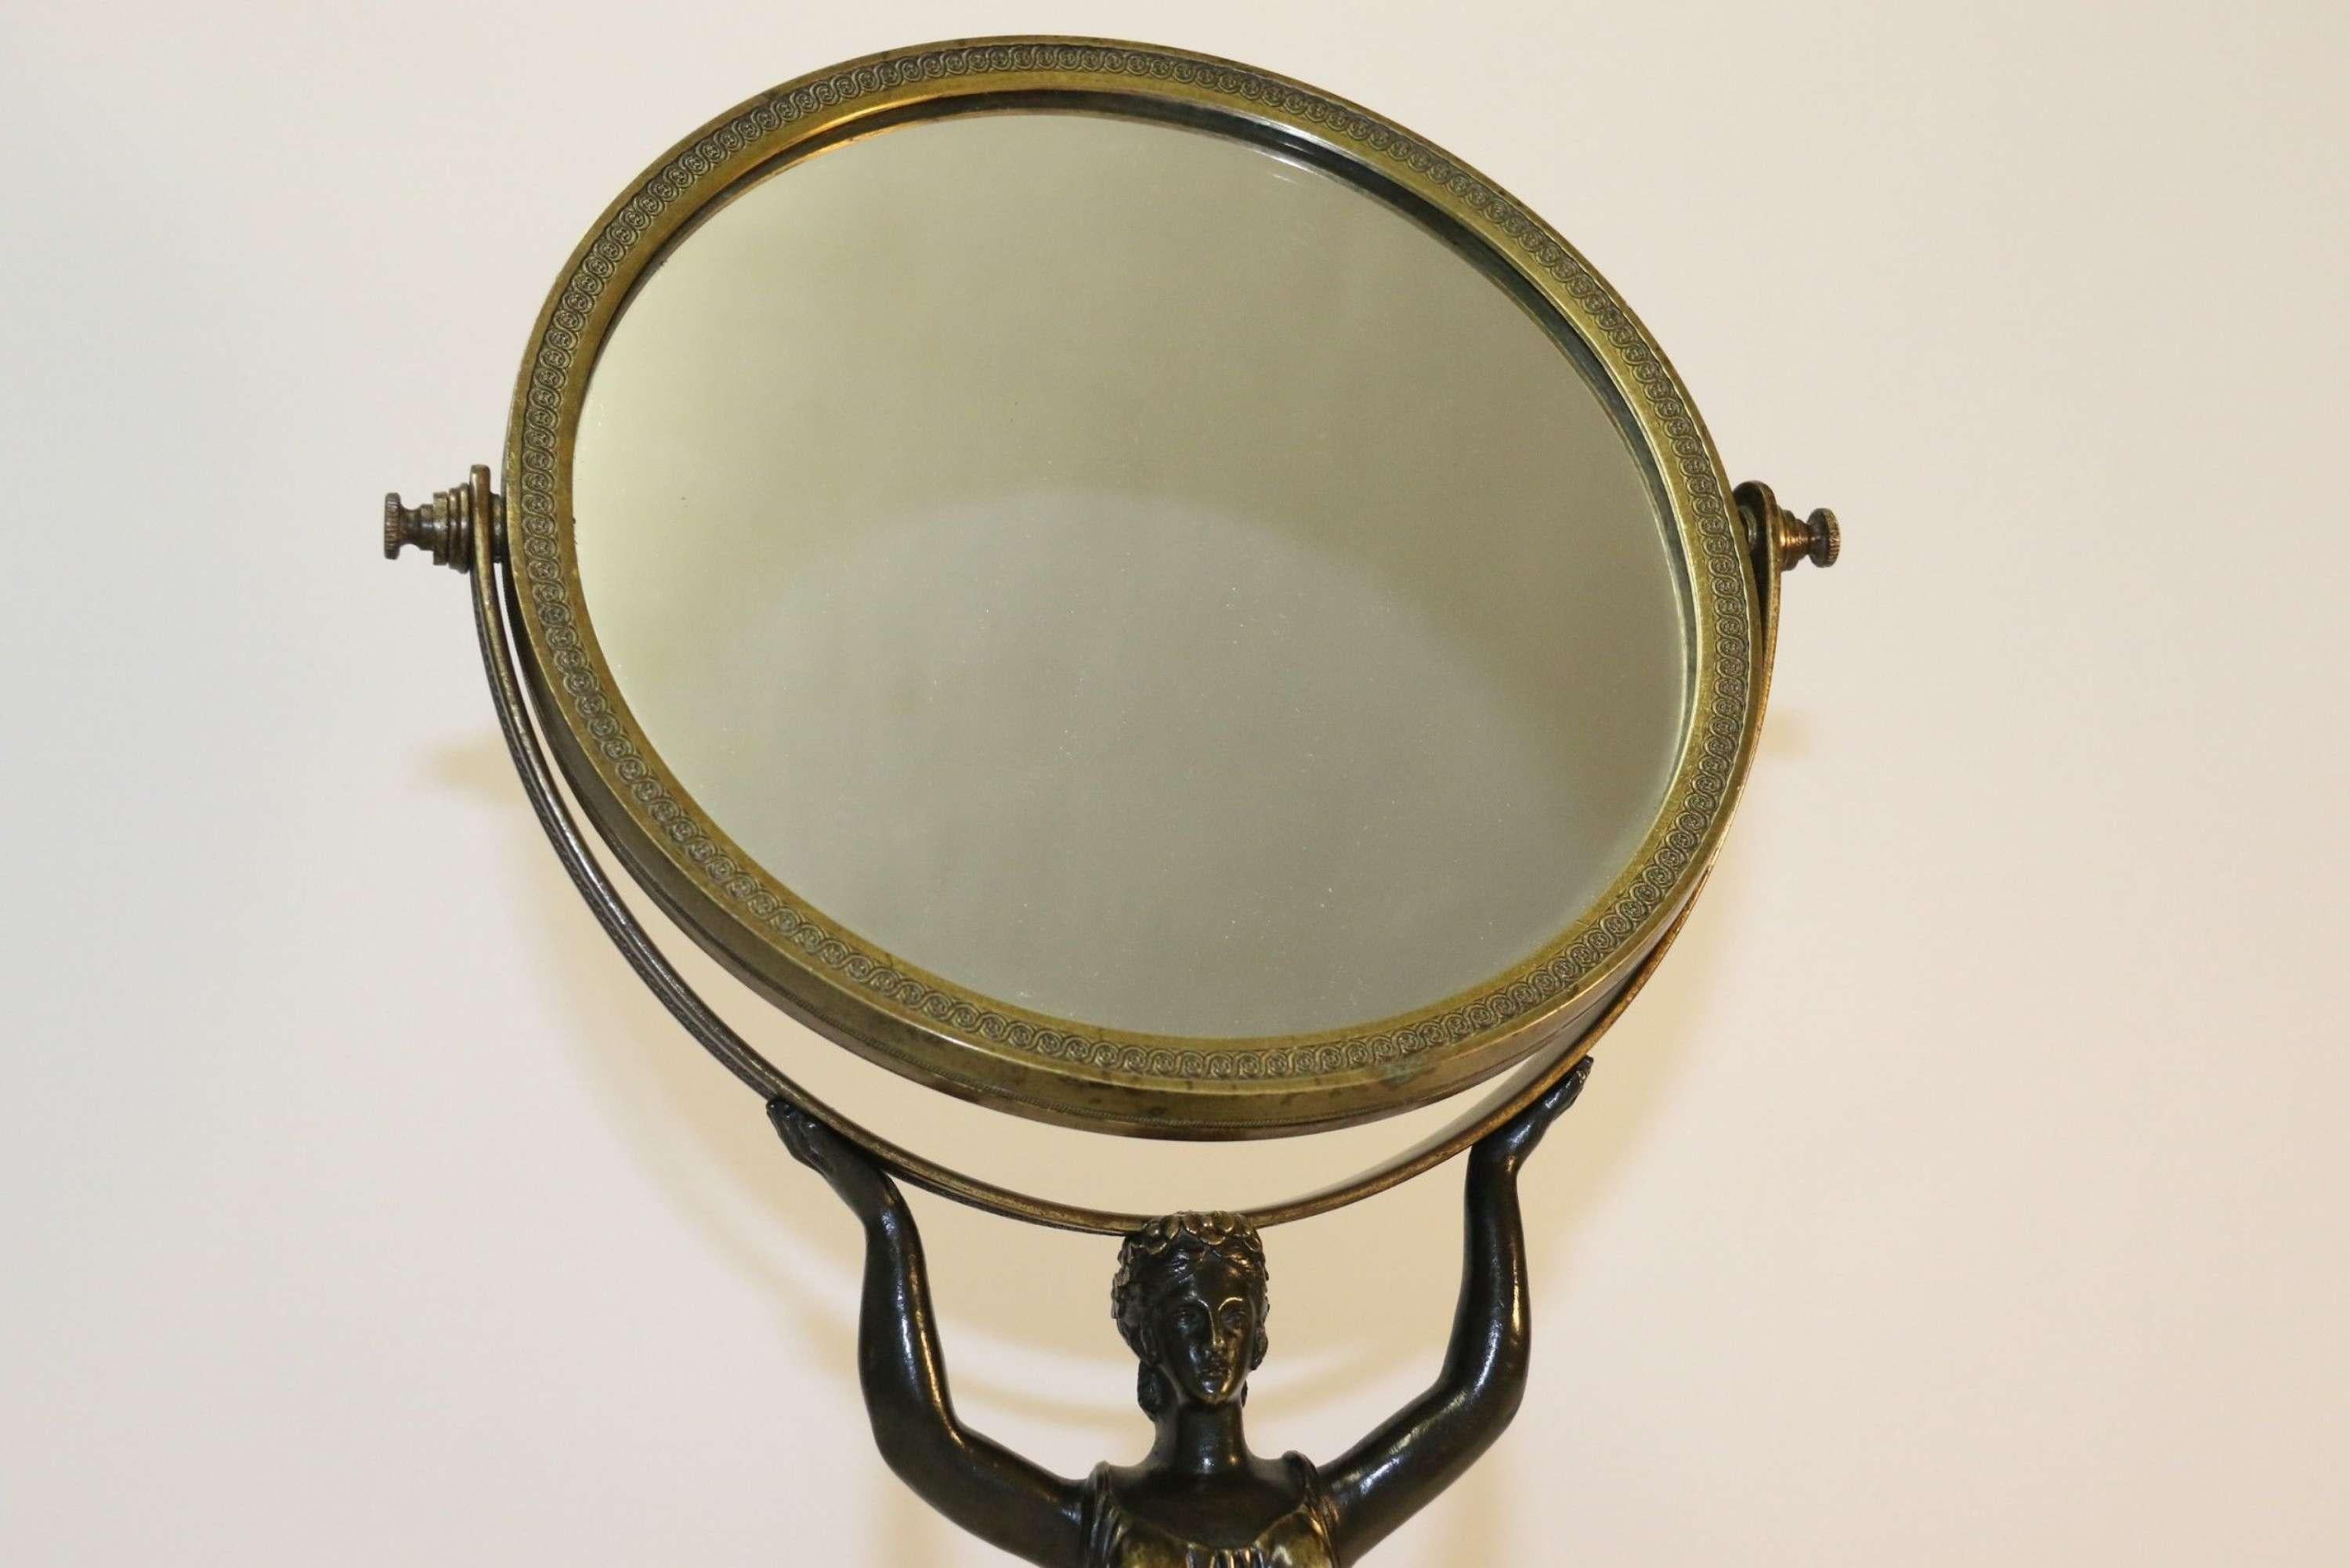 A superb French bronze empire period mirror, circa 1820.

This fine quality superbly detailed French bronze empire period adjustable pedestal mirror is intended for use on a dressing table or chest of drawers. It dates to circa 1820 and has a